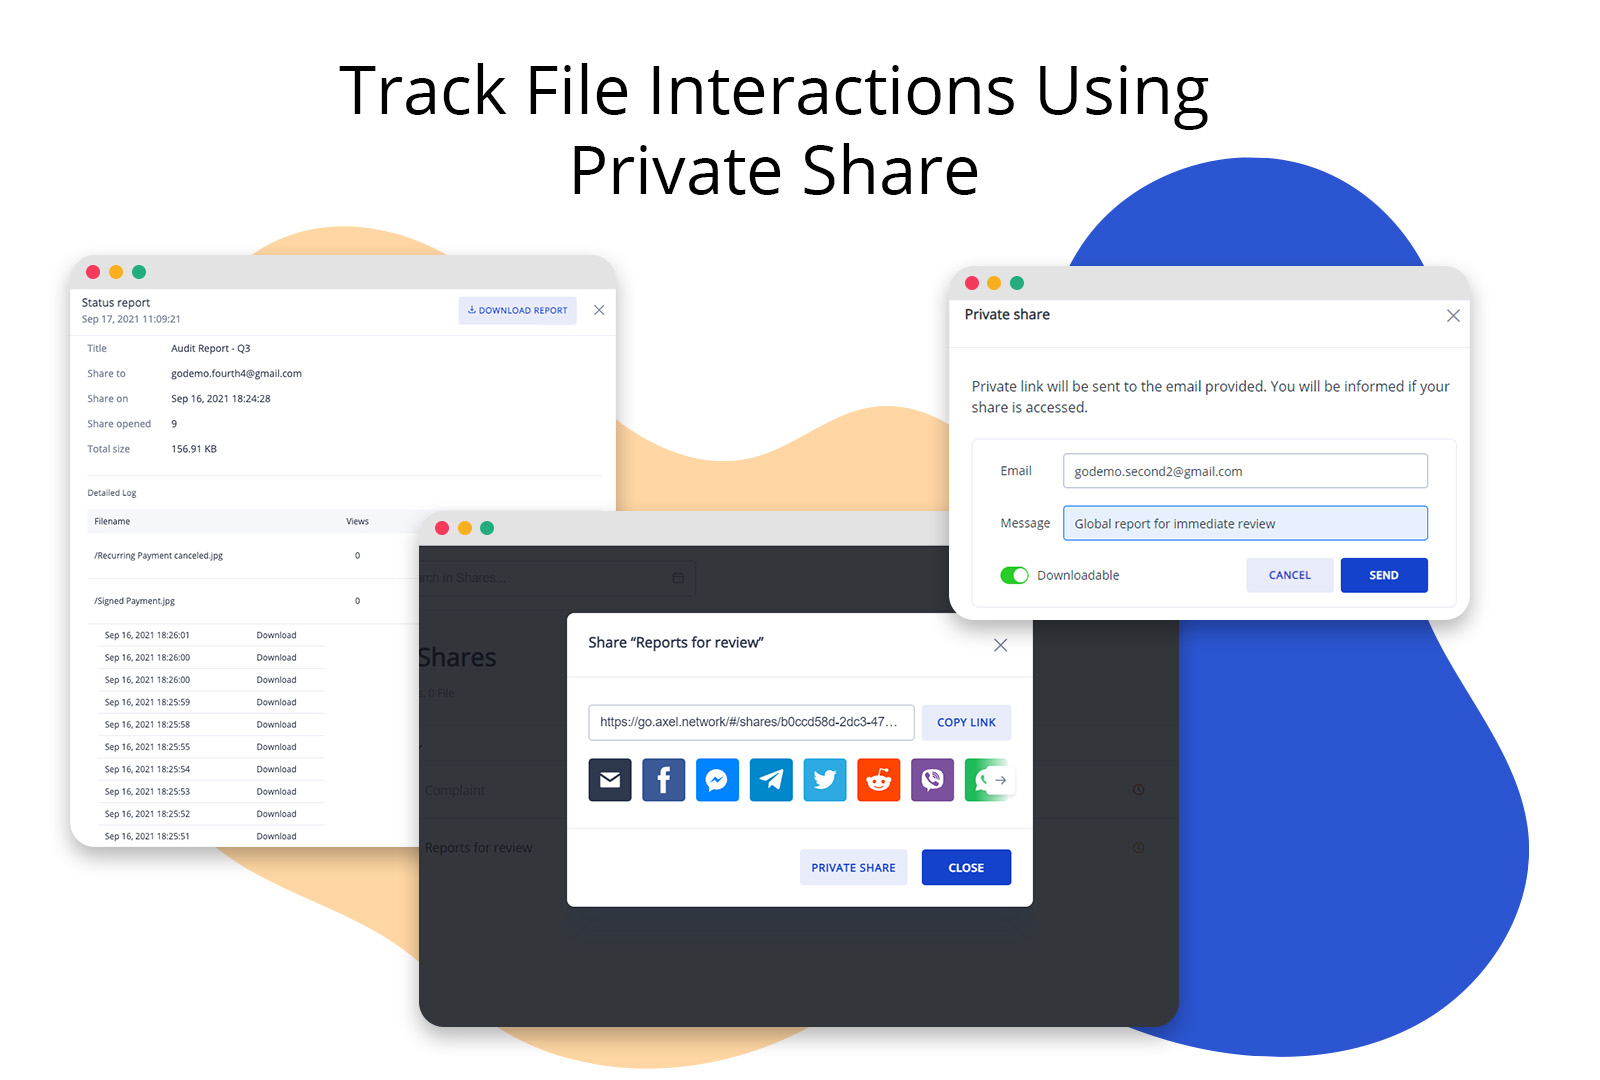 Track File Interactions Using Private Share